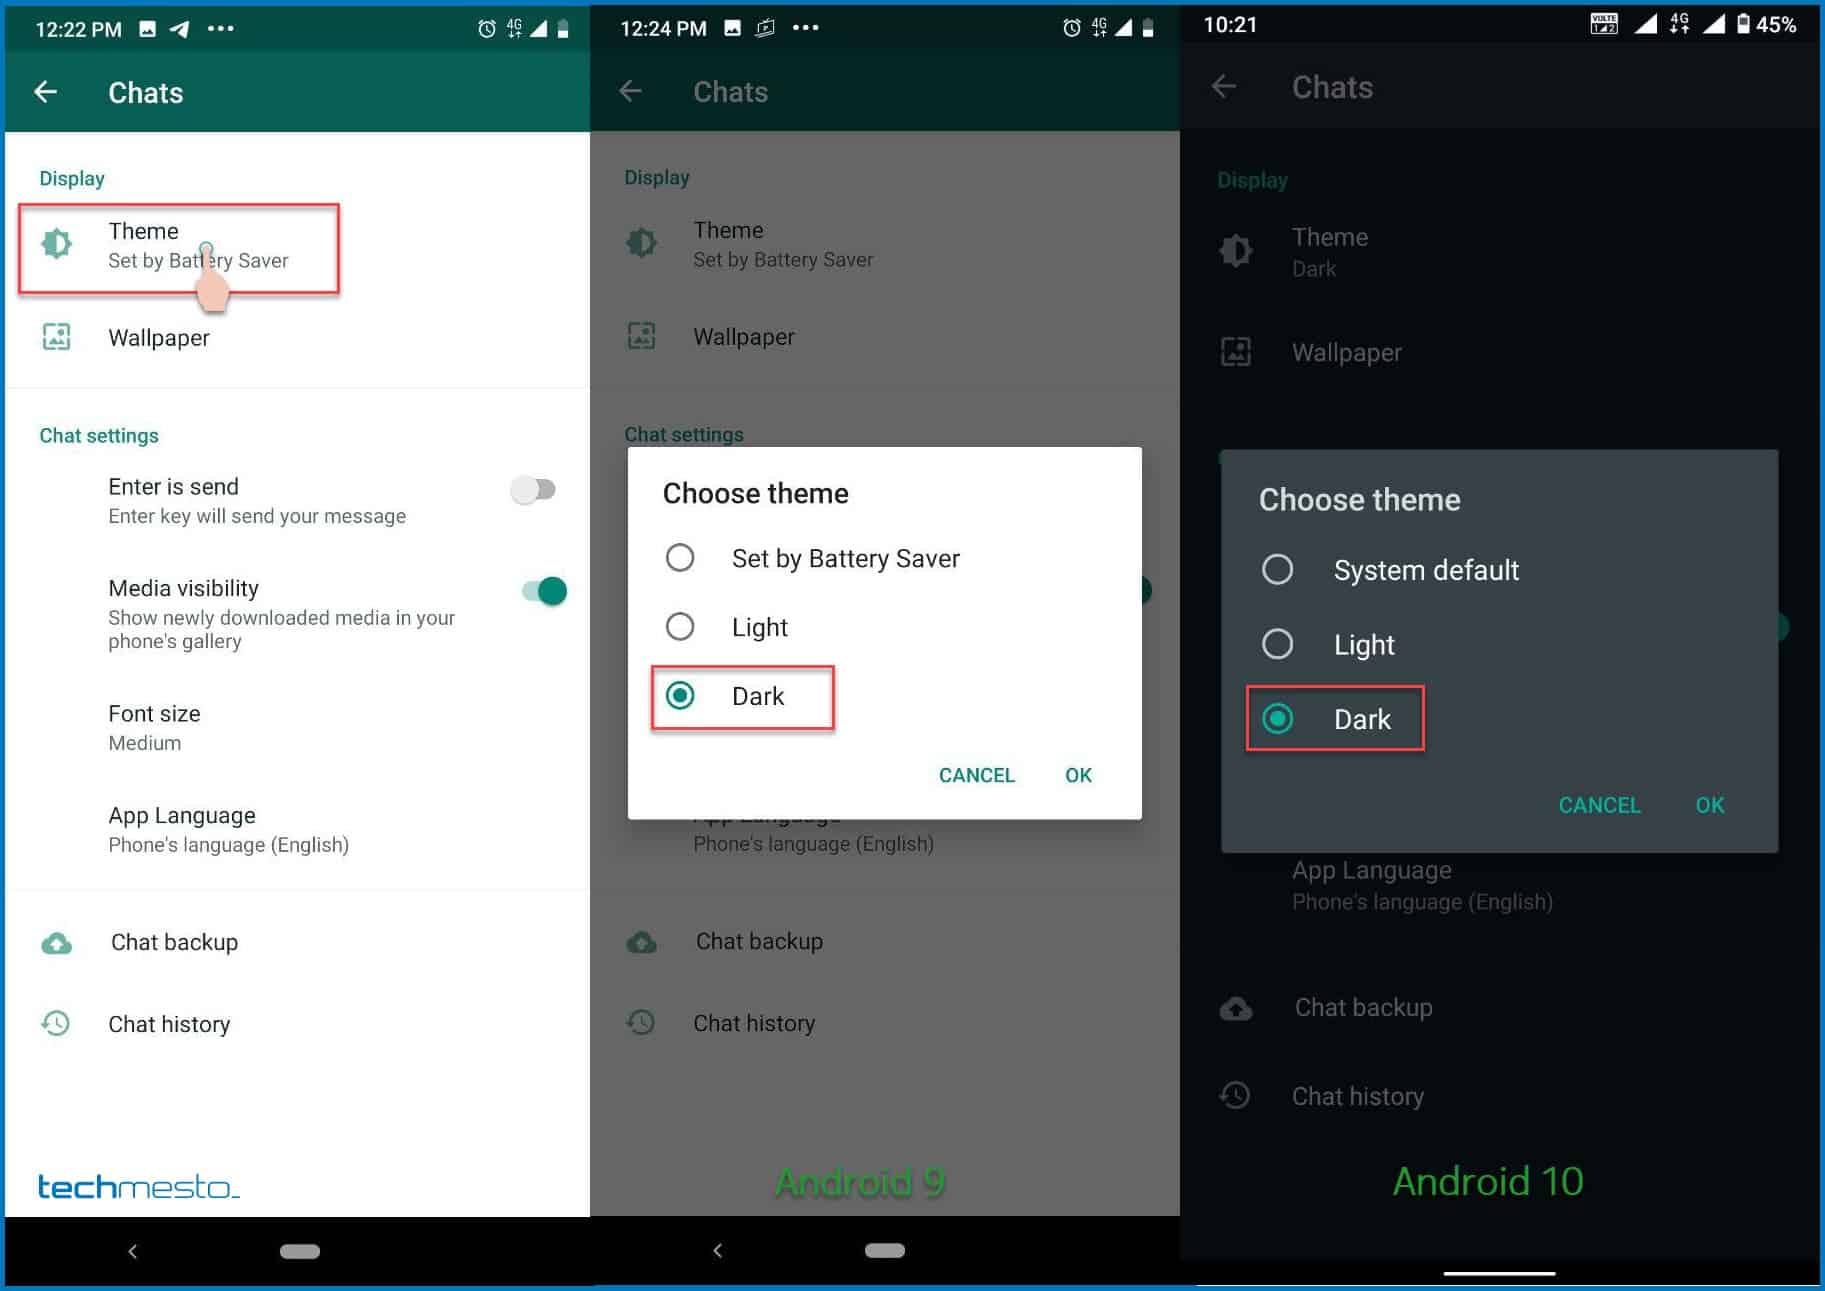 Enable Dark theme in WhatsApp - Android 9 and Android 10